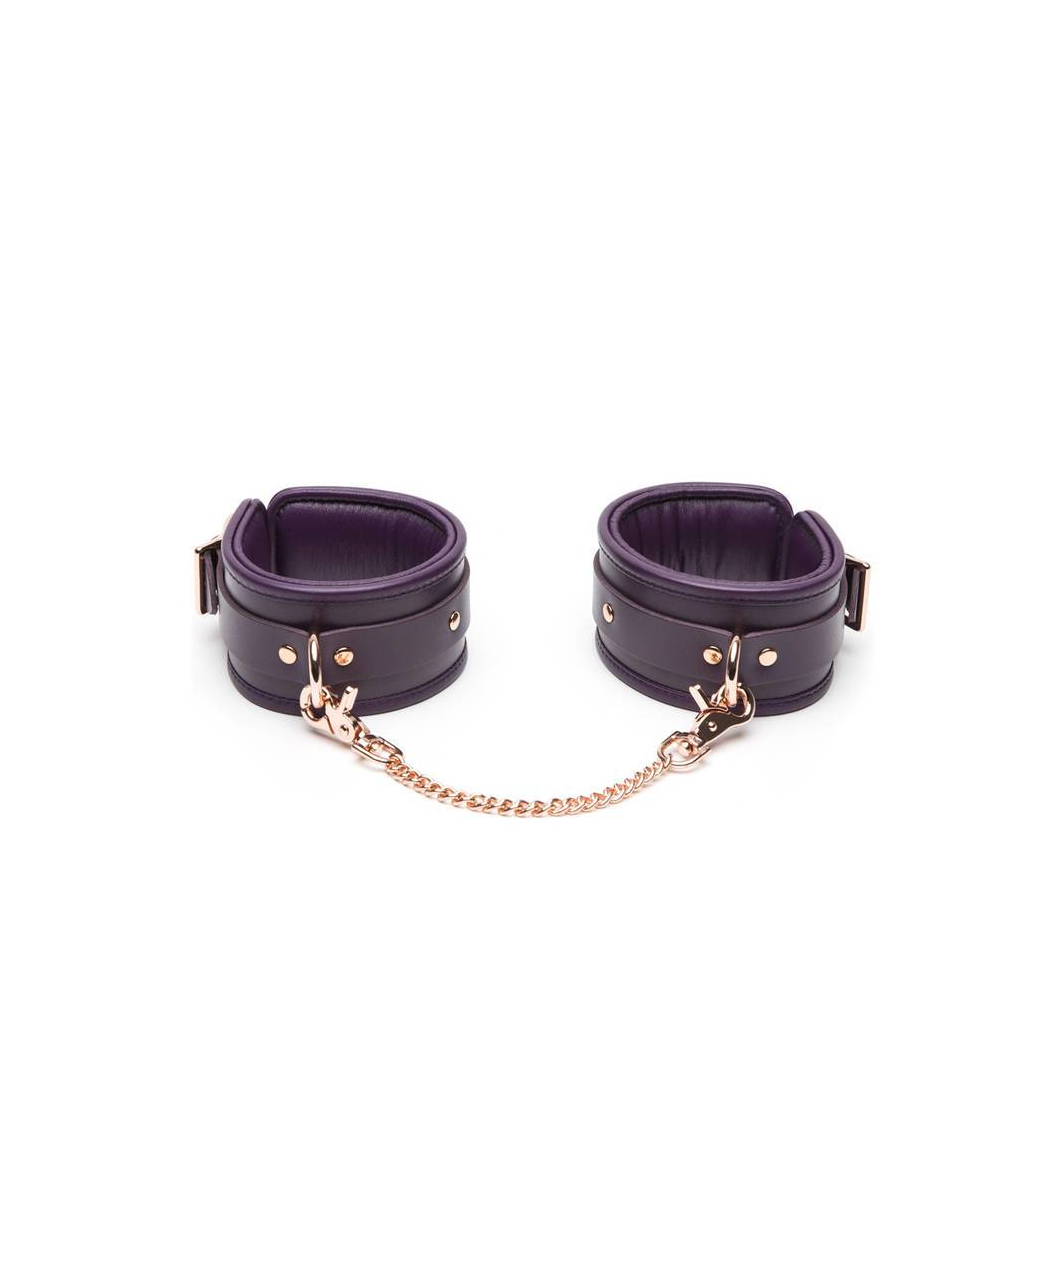 Fifty Shades of Grey Freed Cherished Leather Ankle Cuffs